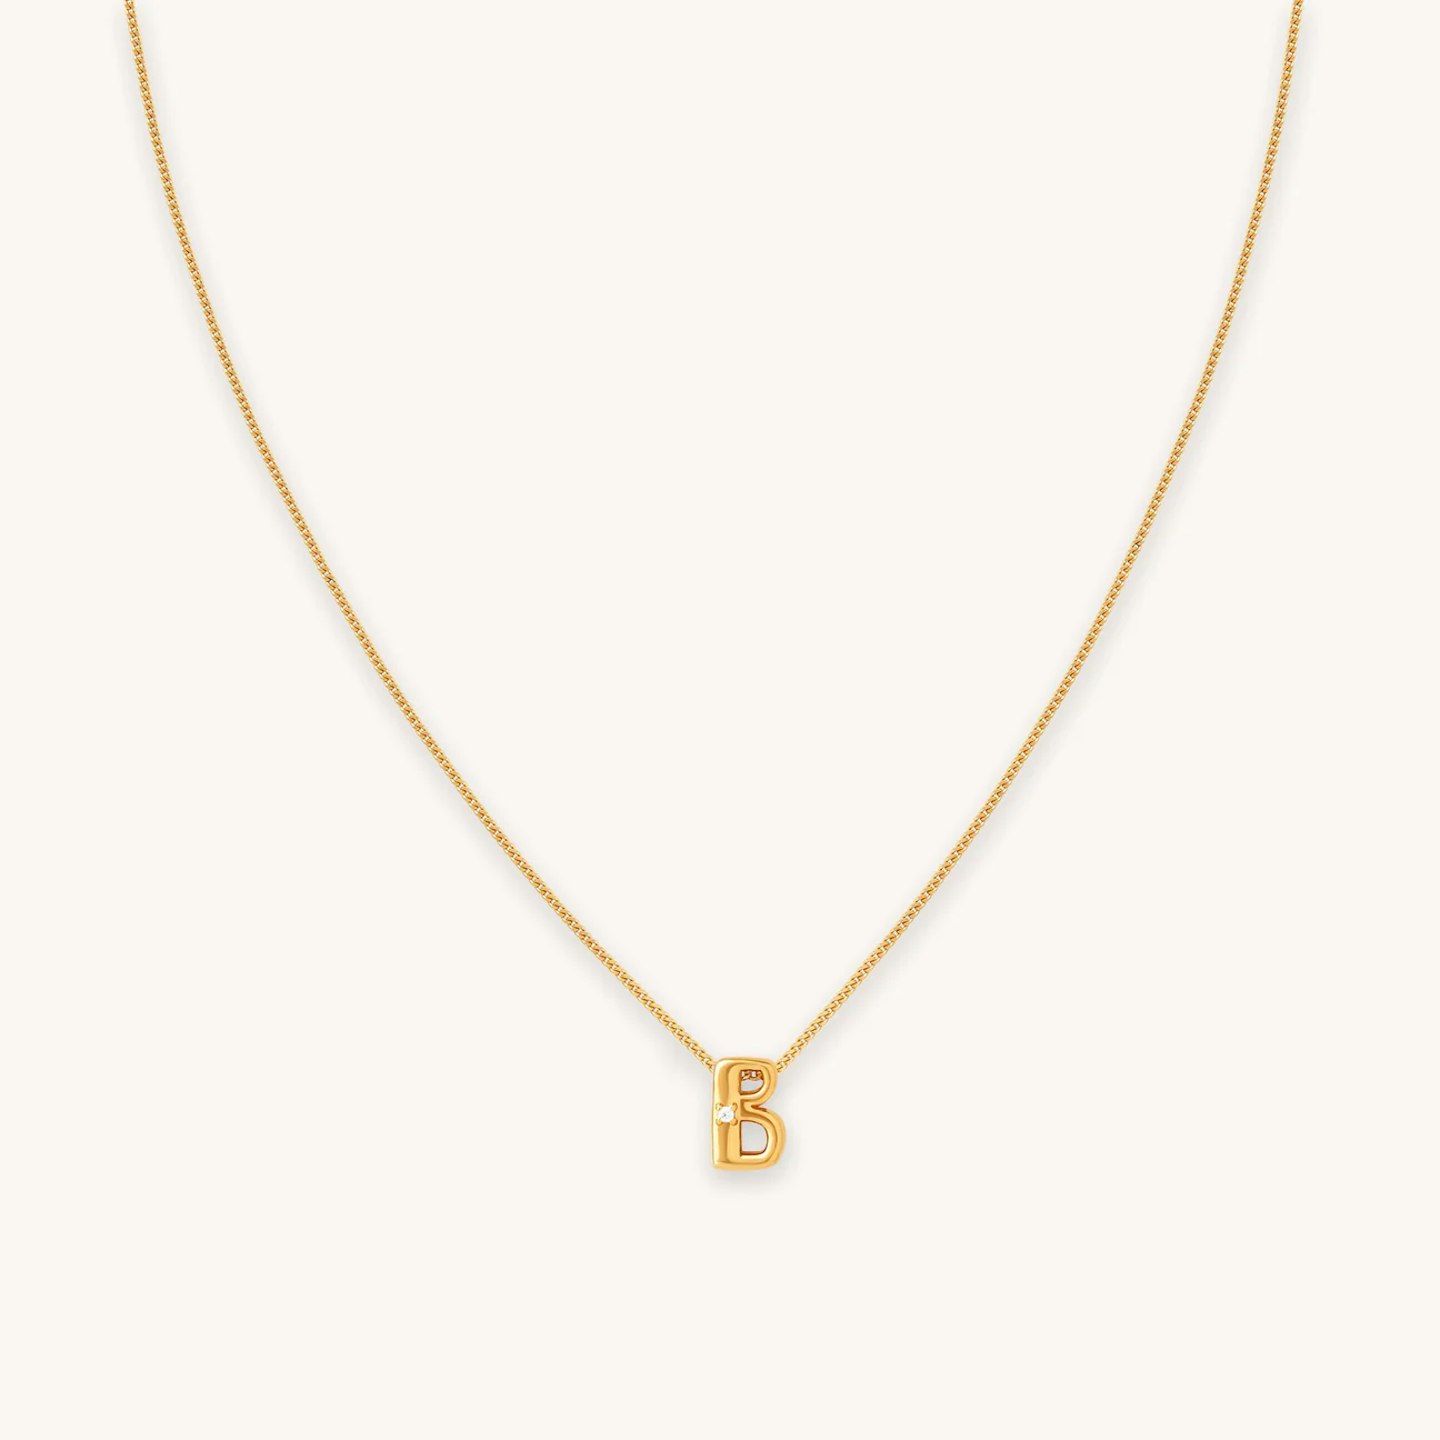 Beyoncé's nameplate necklace: Where to buy similar personalised